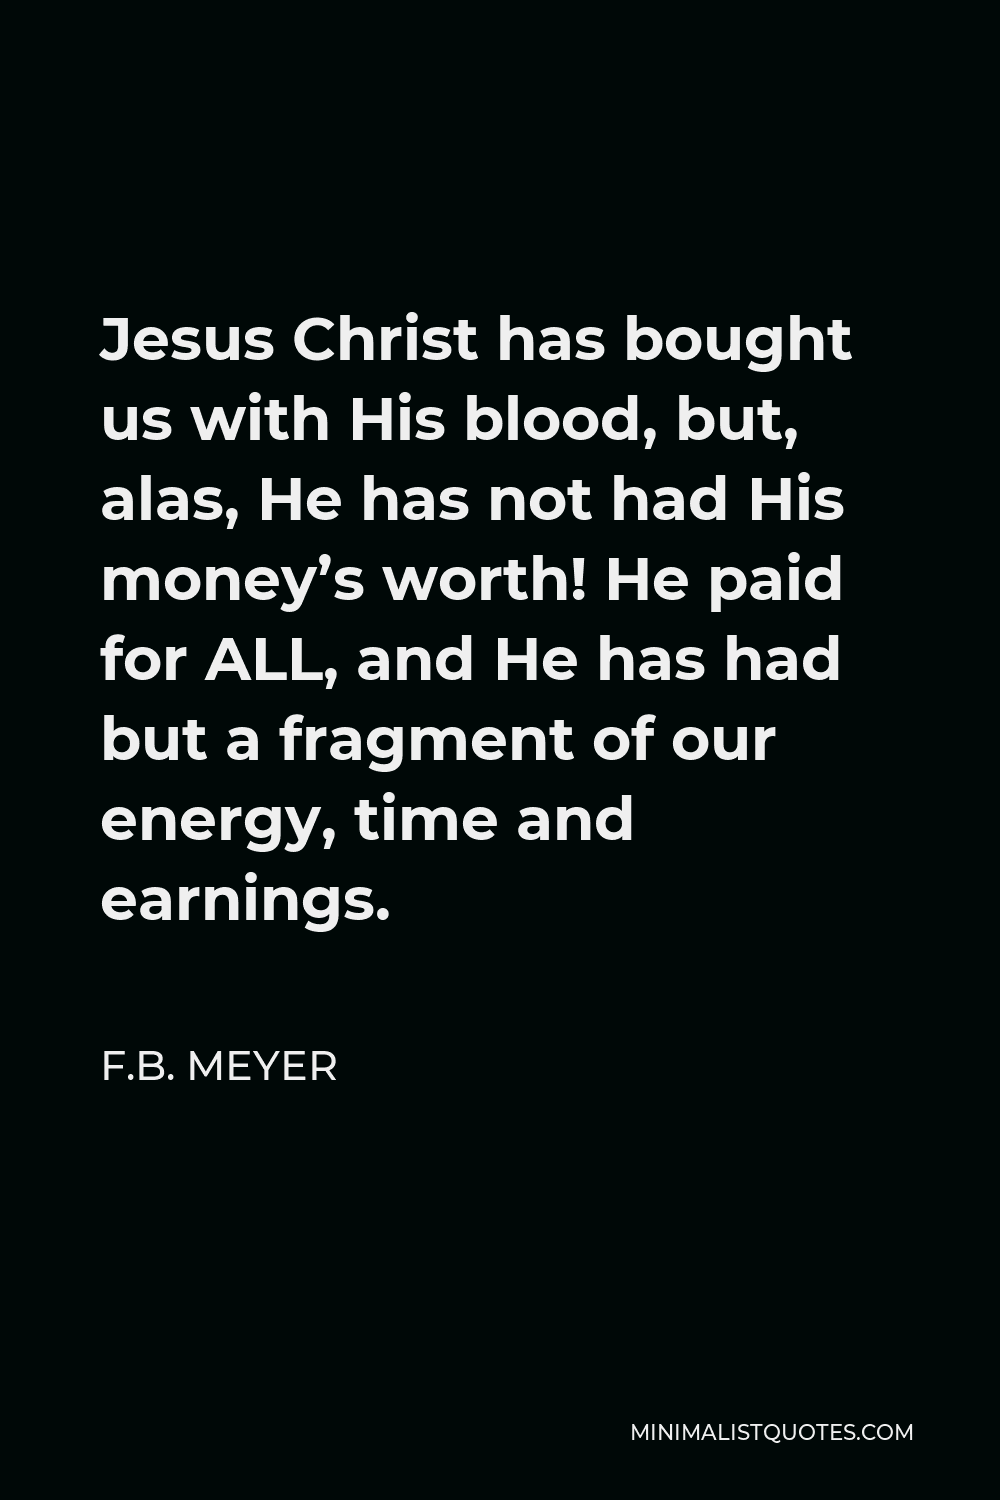 F.B. Meyer Quote - Jesus Christ has bought us with His blood, but, alas, He has not had His money’s worth! He paid for ALL, and He has had but a fragment of our energy, time and earnings.